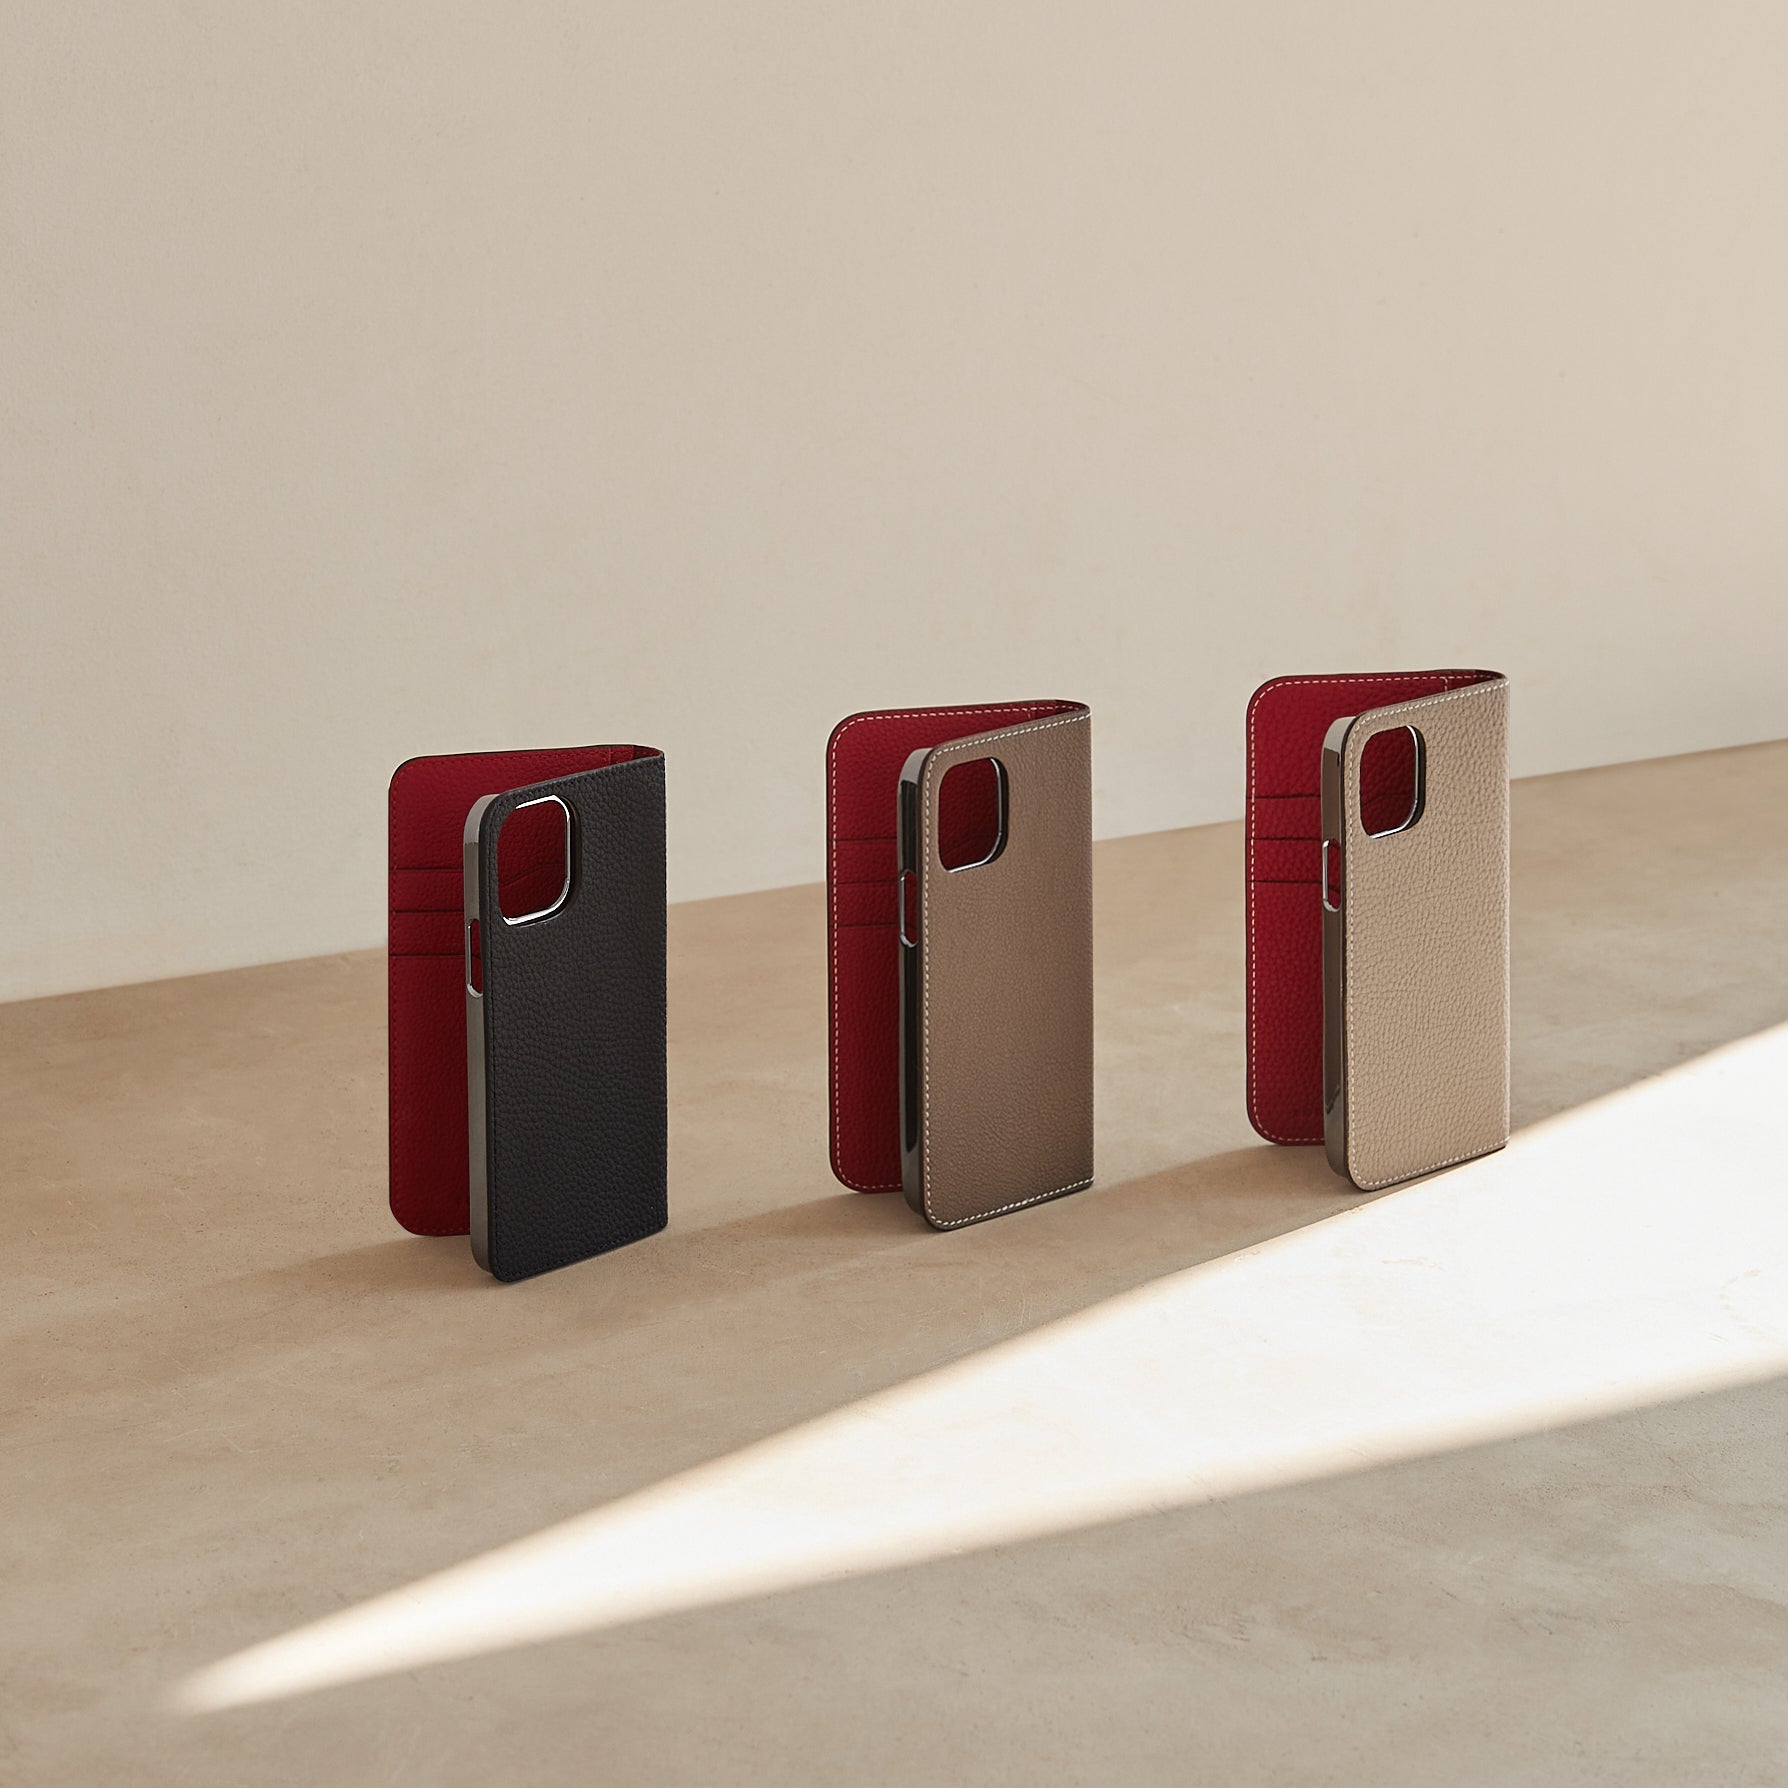 BONAVENTURA iPhone Diary Cases made of Fjord leather in various stylish color combinations.